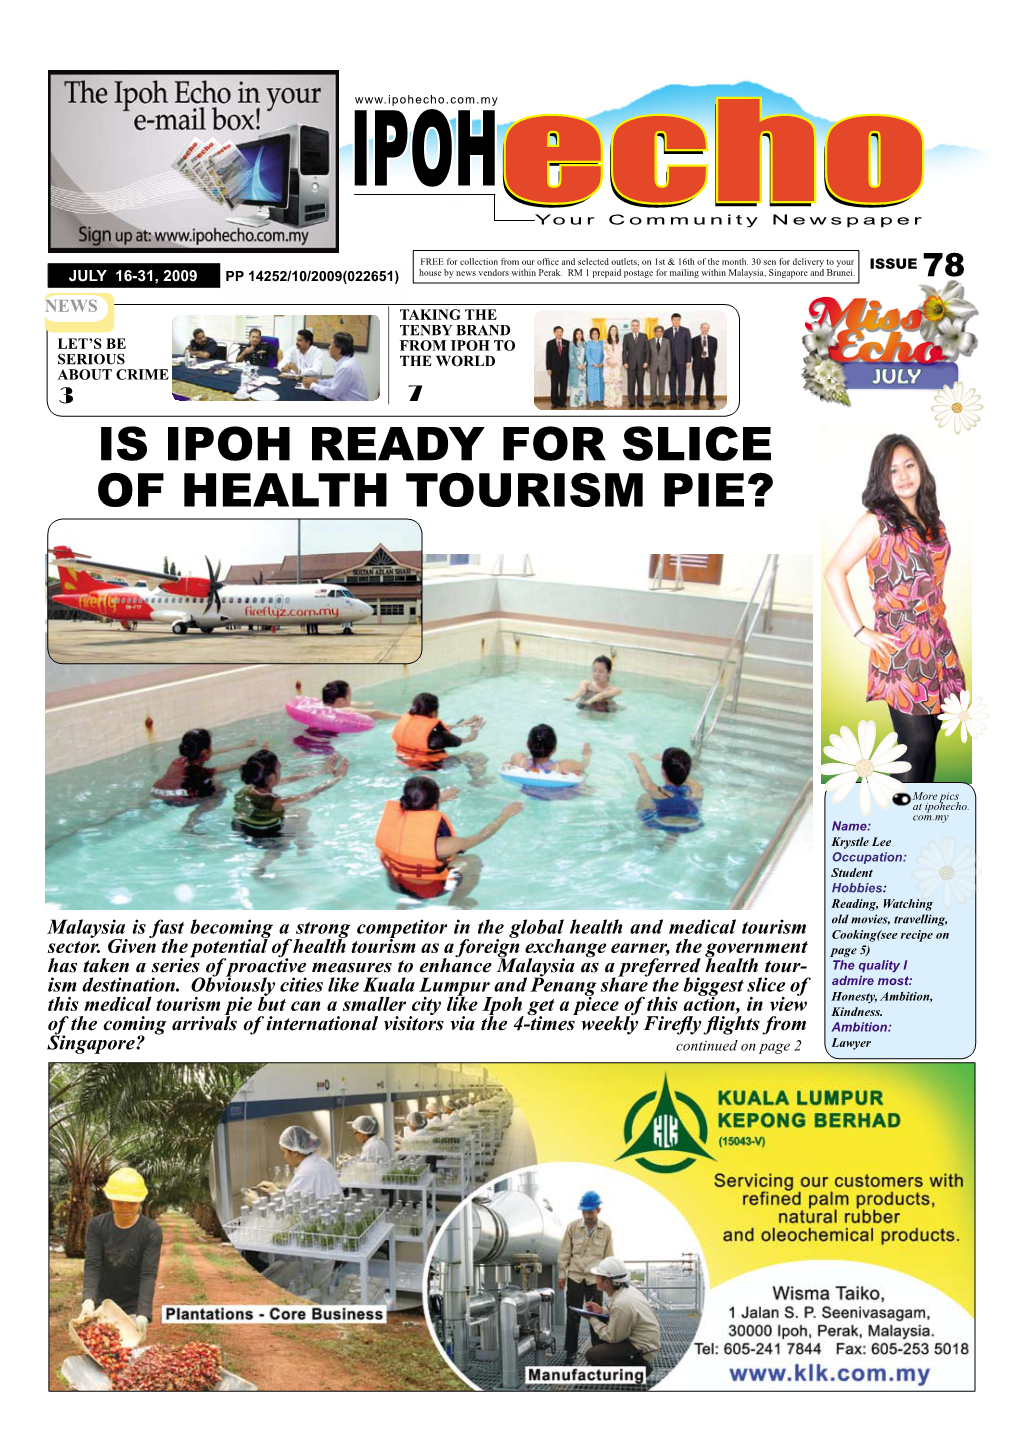 Is Ipoh Ready for Slice of Health Tourism Pie?